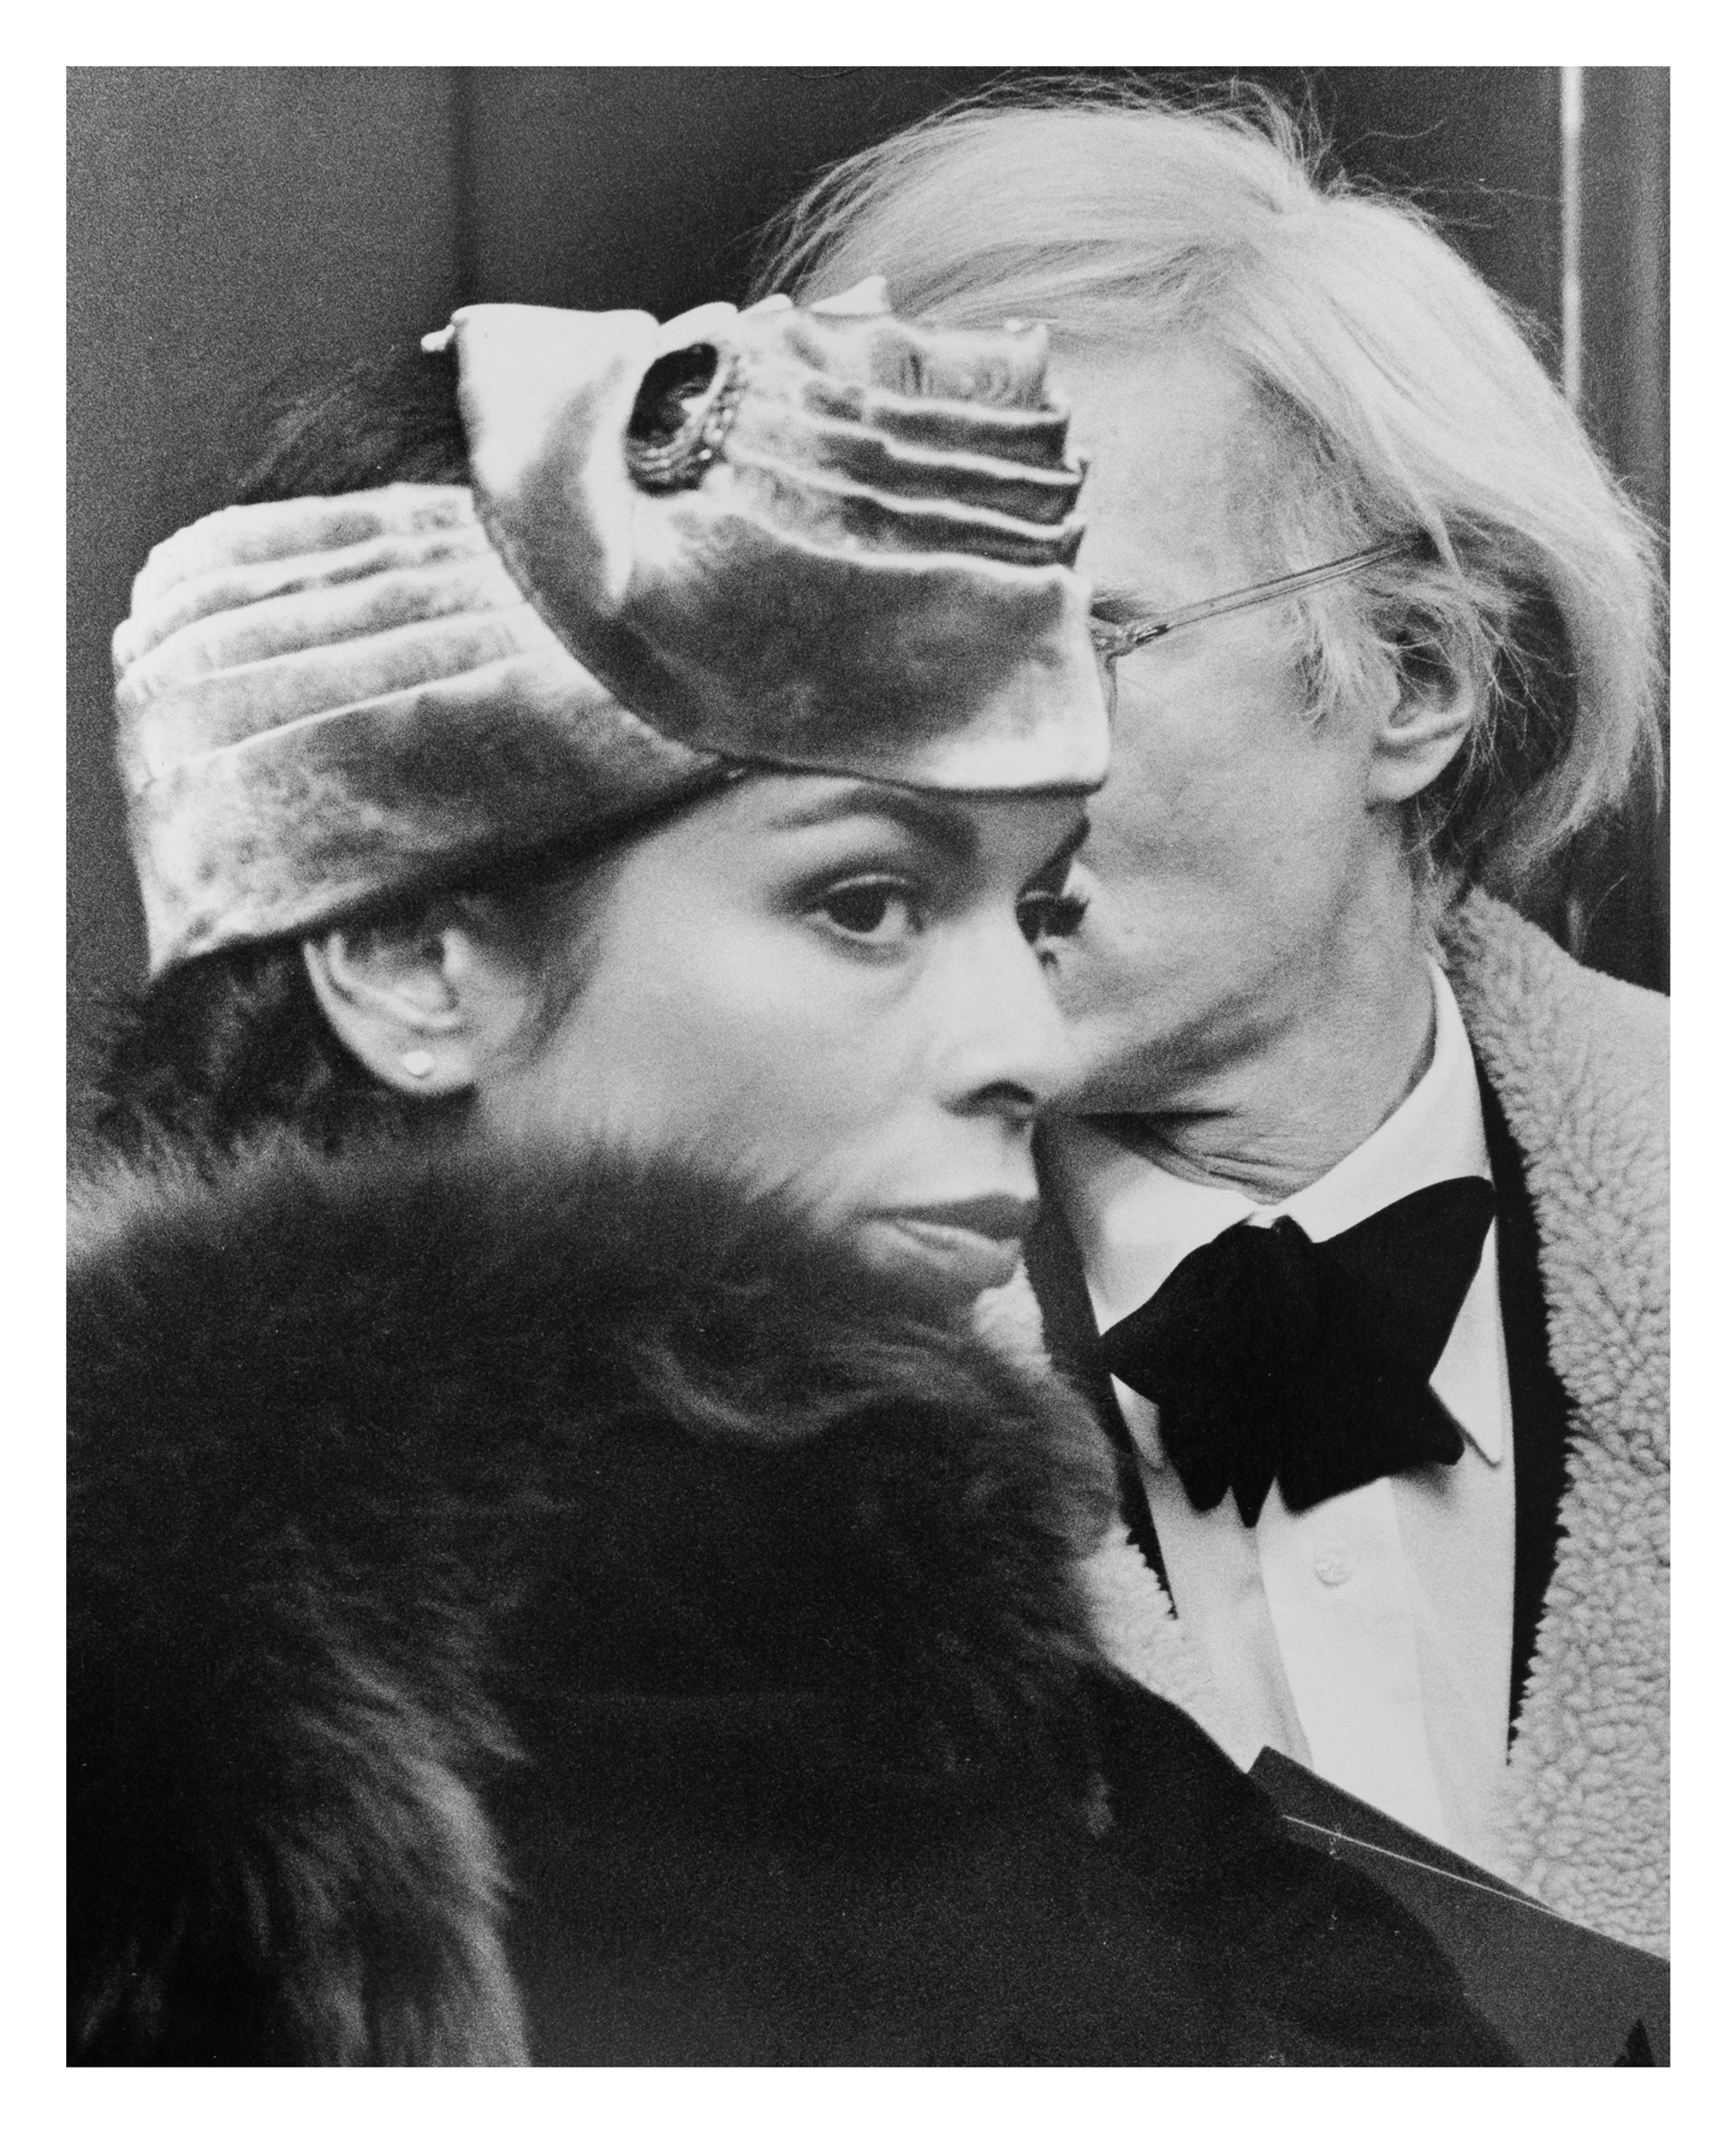 Andy Warhol and Bianca Jagger by Ron Galella